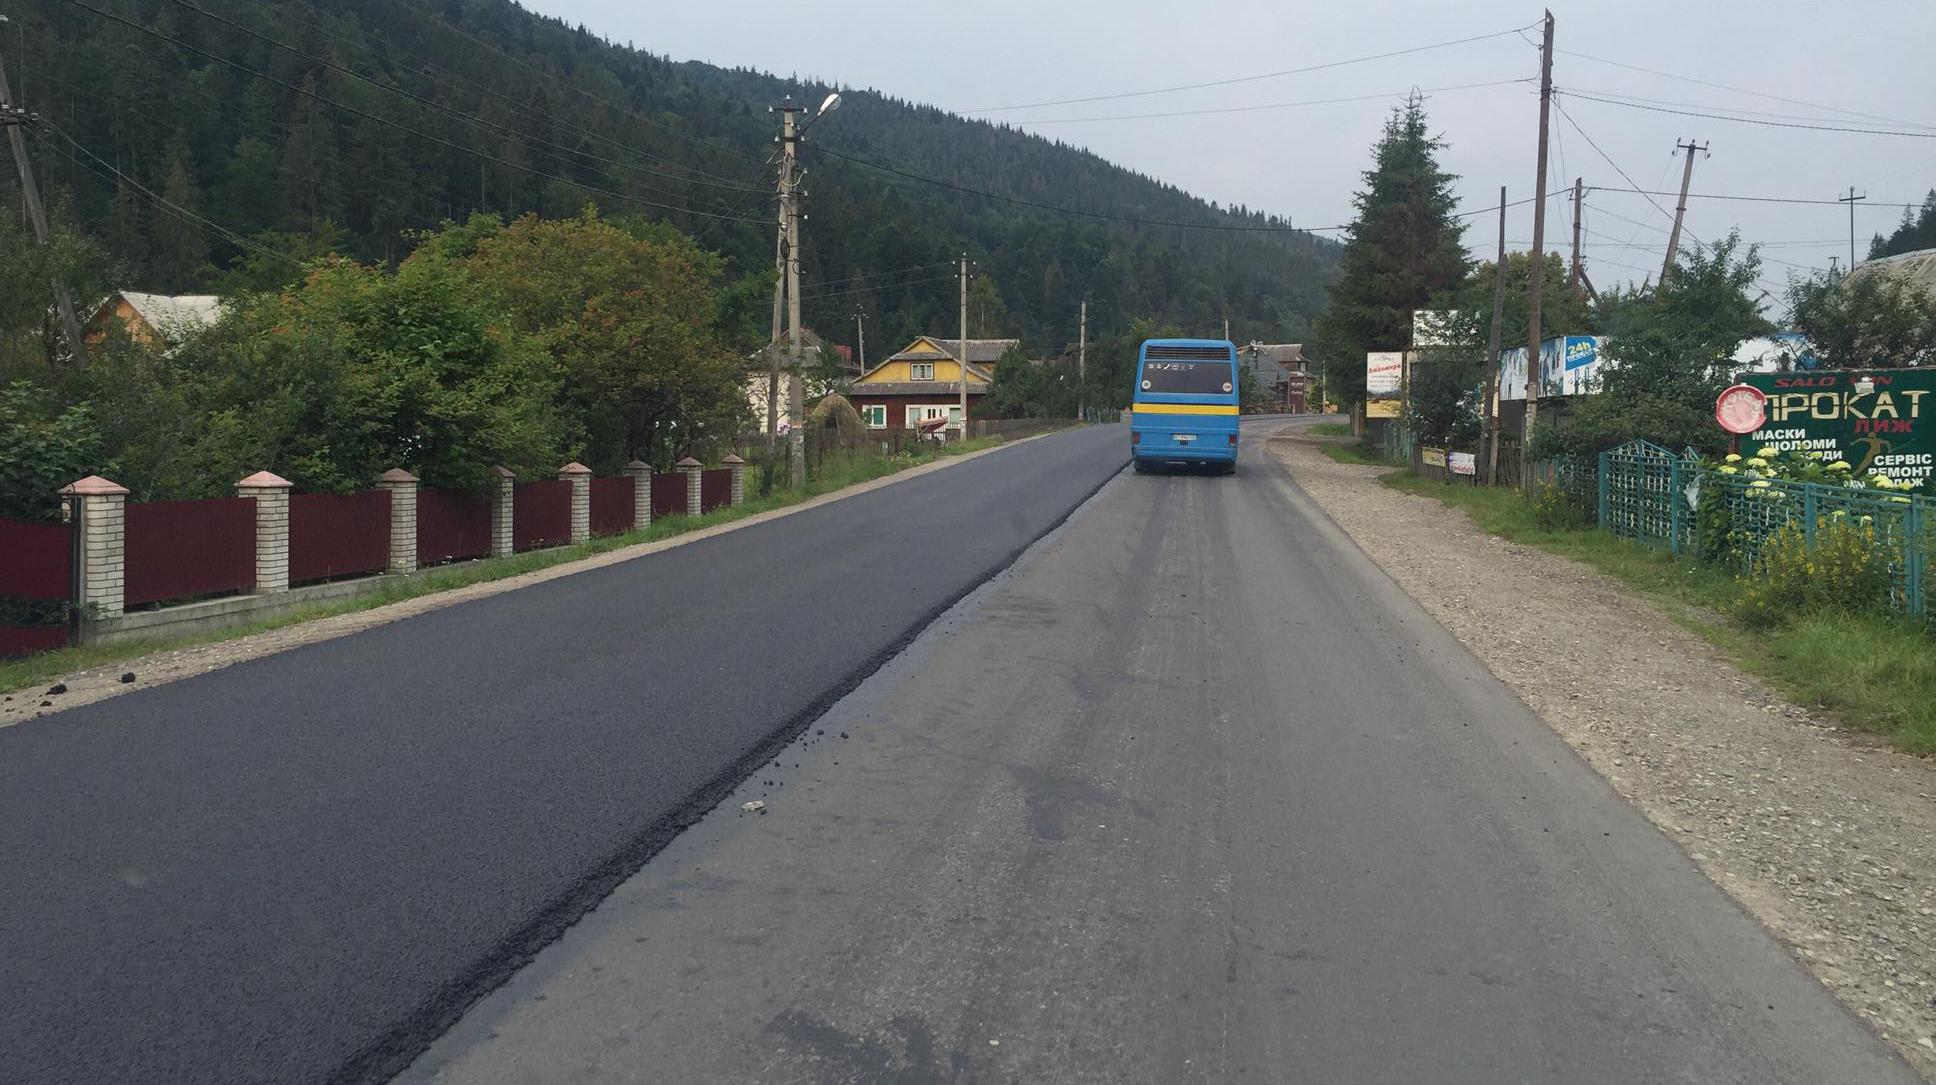 Tatariv village: the road got improved in just one night